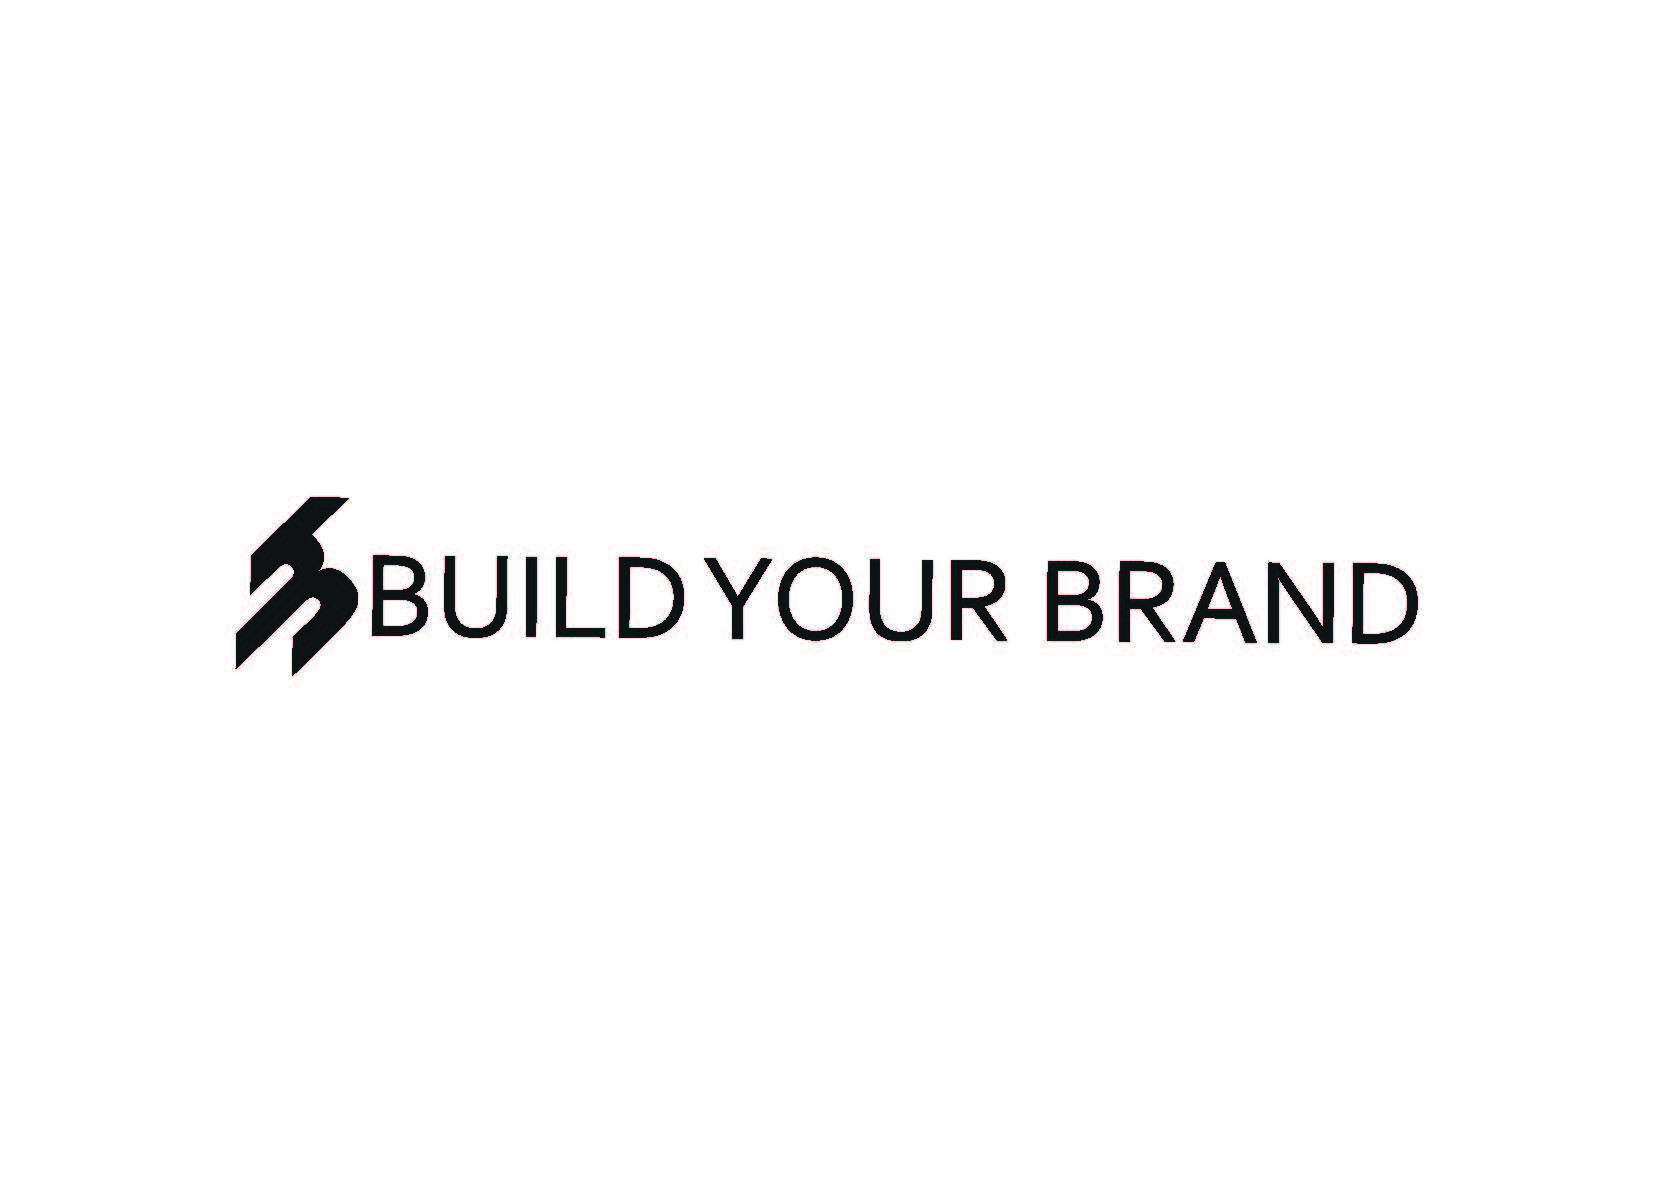 BUILD YOUR BRAND